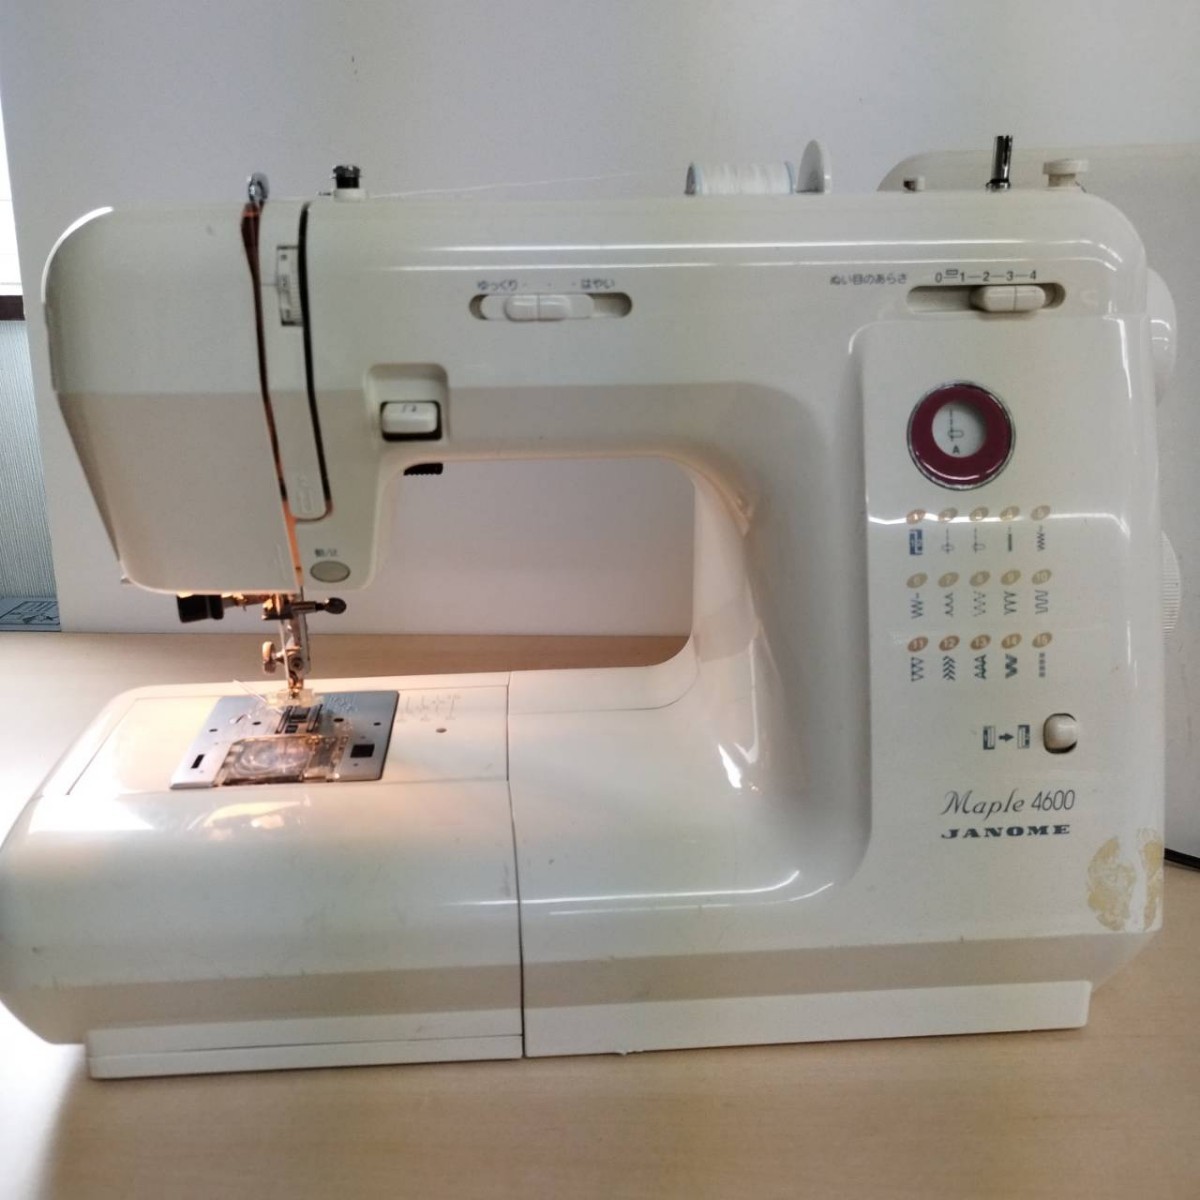 JANOME ジャノメ Maple 4600 ミシン 家庭用ミシン 手工芸 裁縫 _画像2